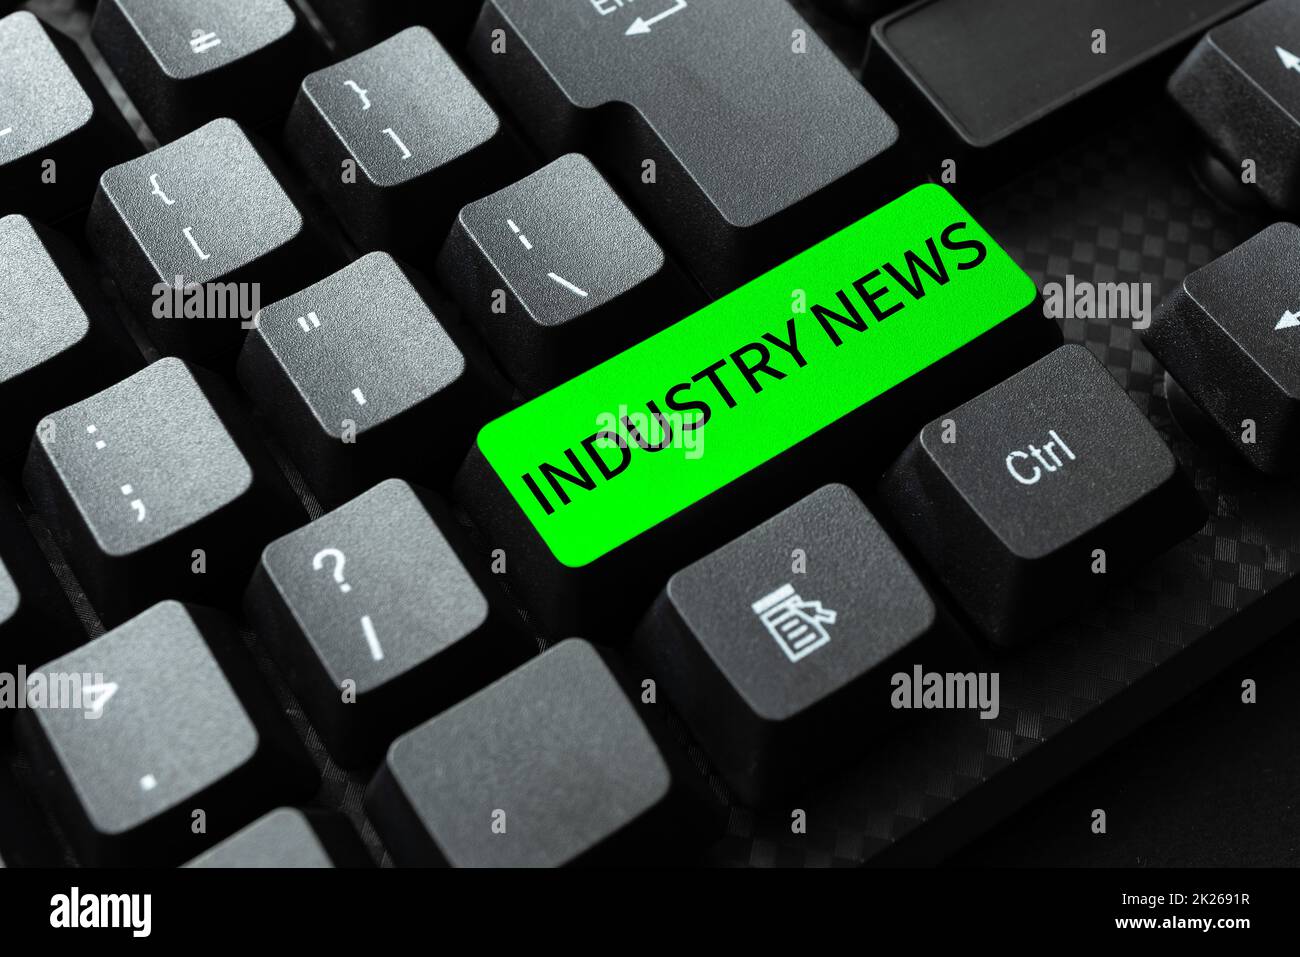 Conceptual caption Industry News. Business idea Technical Market Report Manufacturing Trade Builder Abstract Gathering Investigation Clues Online, Presenting Internet Ideas Stock Photo